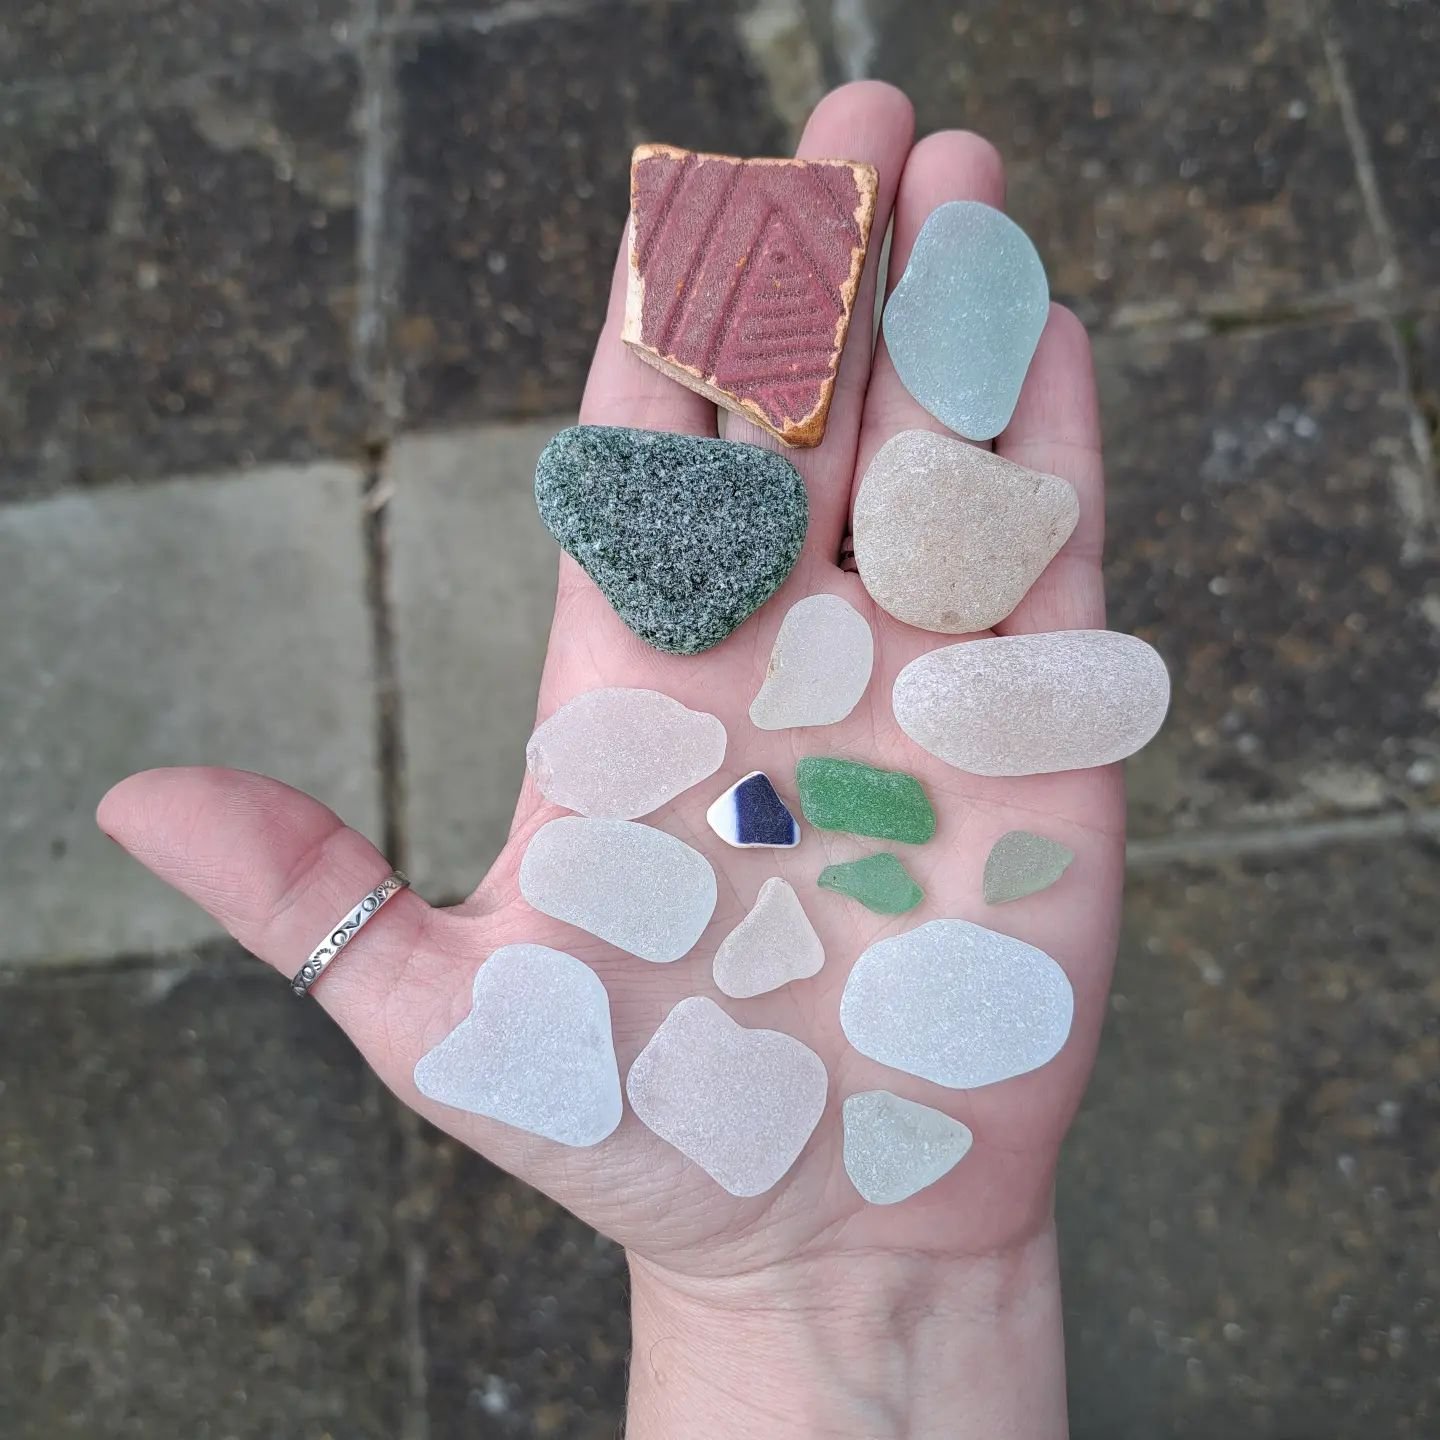 Here's a little selection found on an Easter trip to the seaside. Mostly white frostiness but a couple of pottery pieces and some fairly large chunks 🥰 THE nicest day having a stroll in what was quite a warm day (and we stayed dry - always a plus!)
